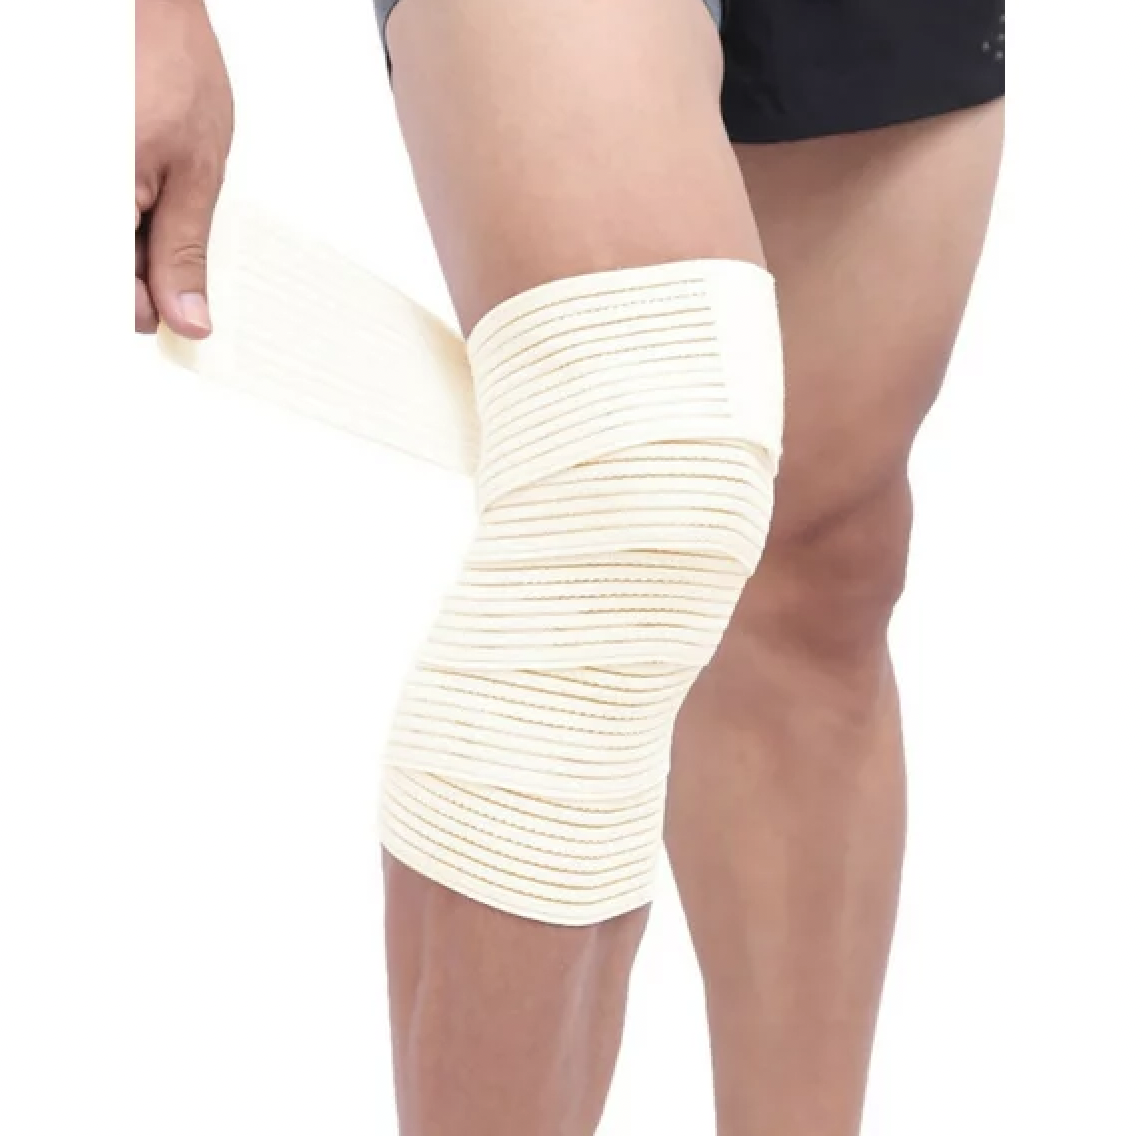 Brace Yourself: Getting Knee Support for Knee Pain – Carmichael's